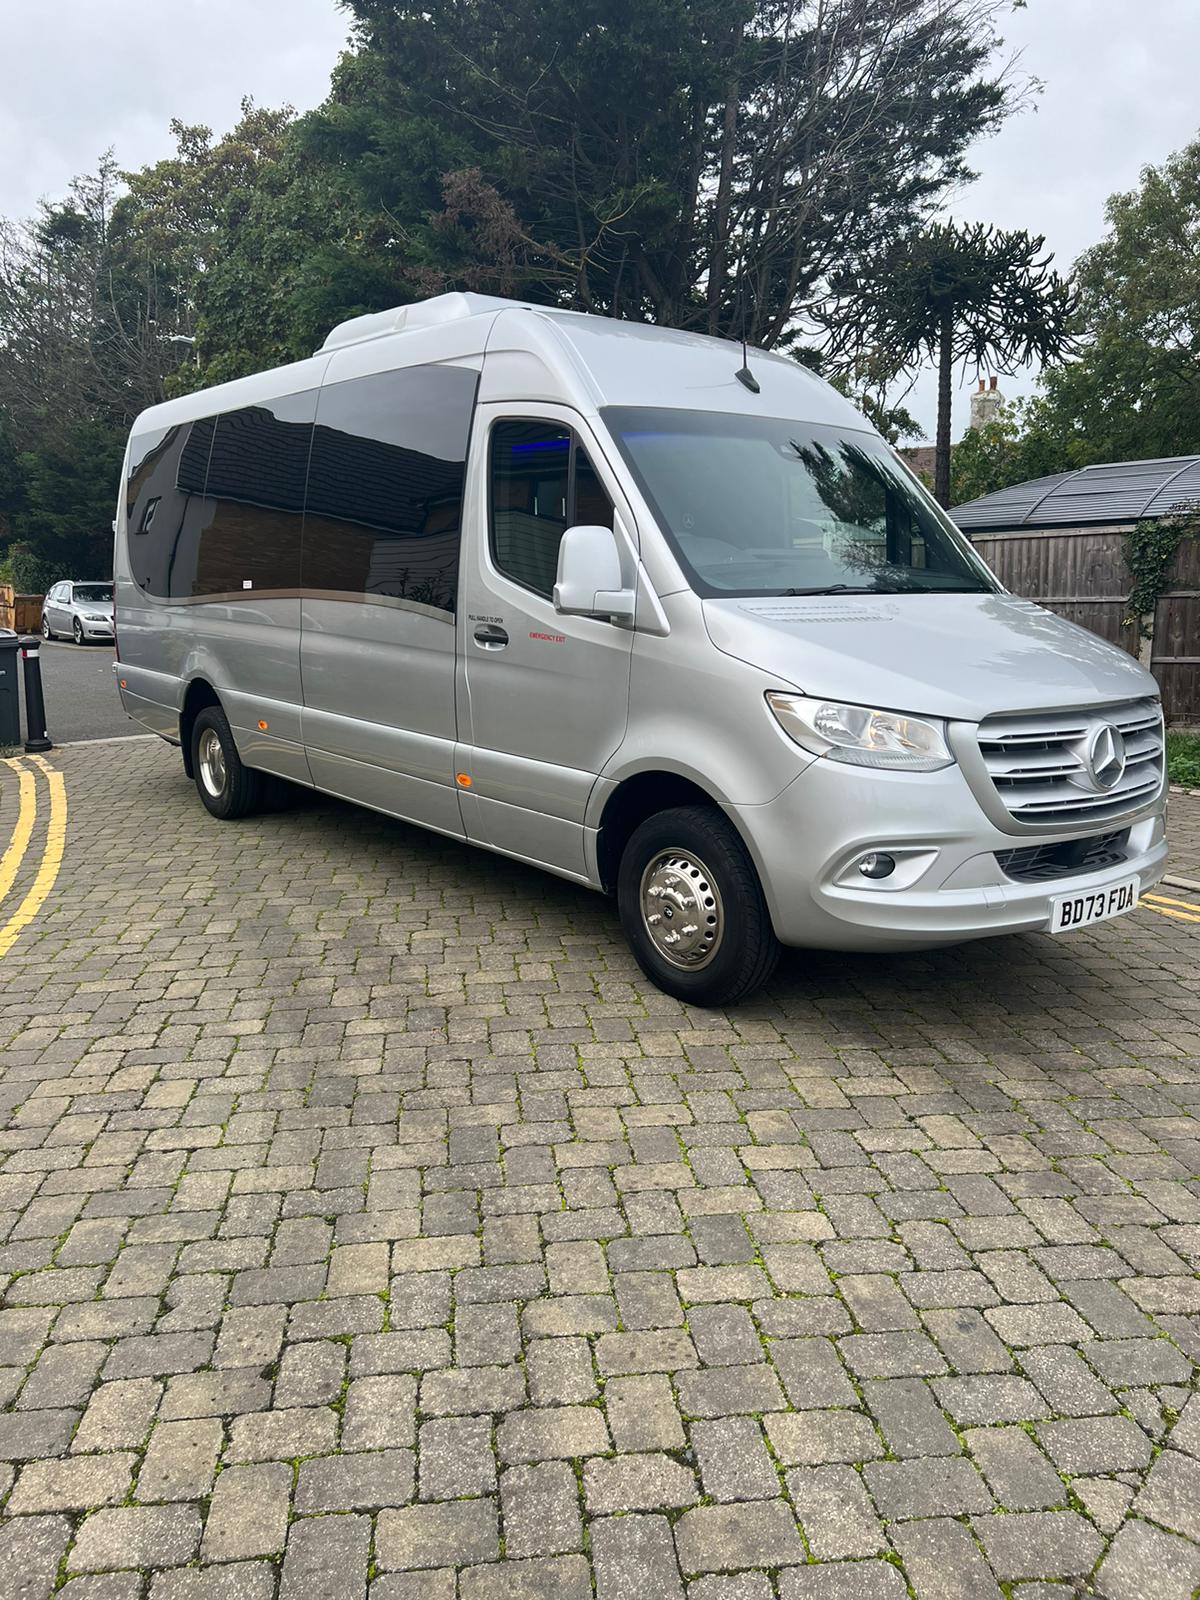 How to Find the Best Deals on 16 Seater Minibus Hire in the UK